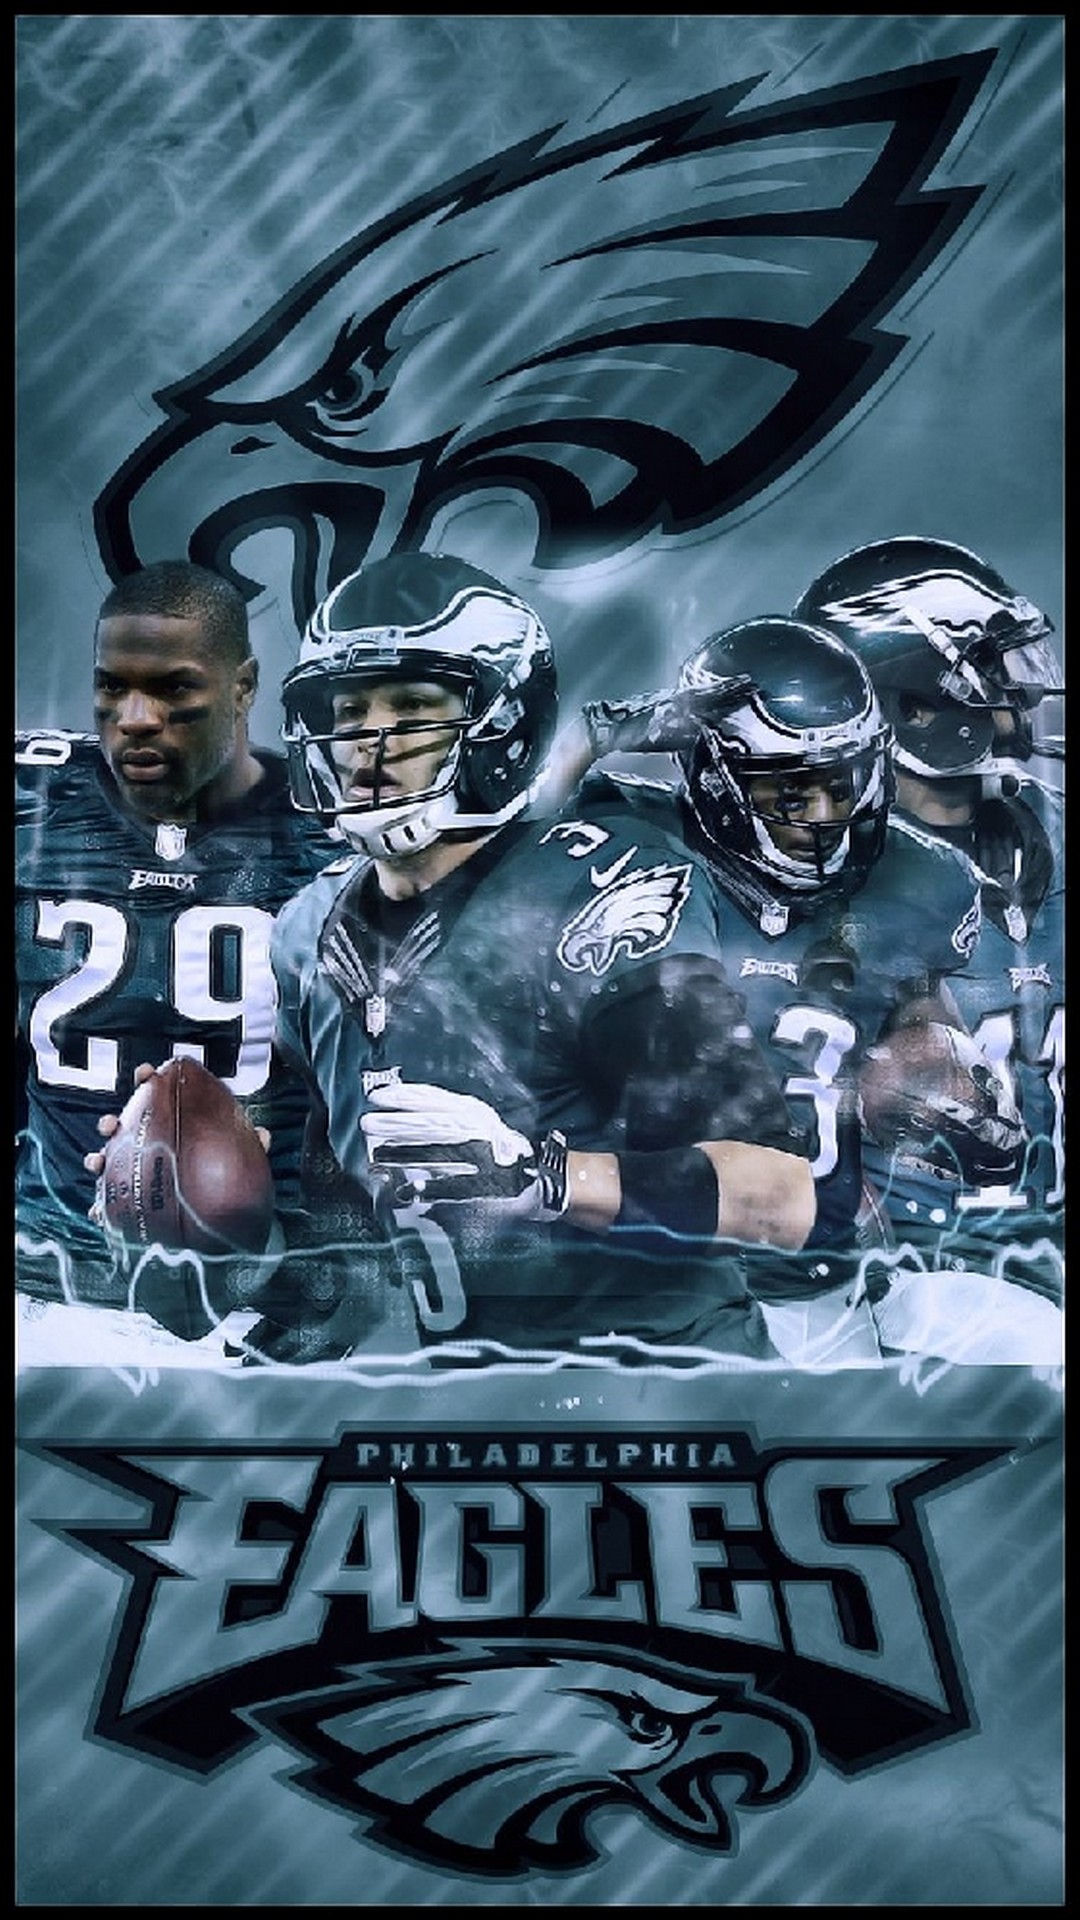 iPhone Wallpaper HD The Eagles With Resolution 1080X1920 pixel. You can make this wallpaper for your Mac or Windows Desktop Background, iPhone, Android or Tablet and another Smartphone device for free